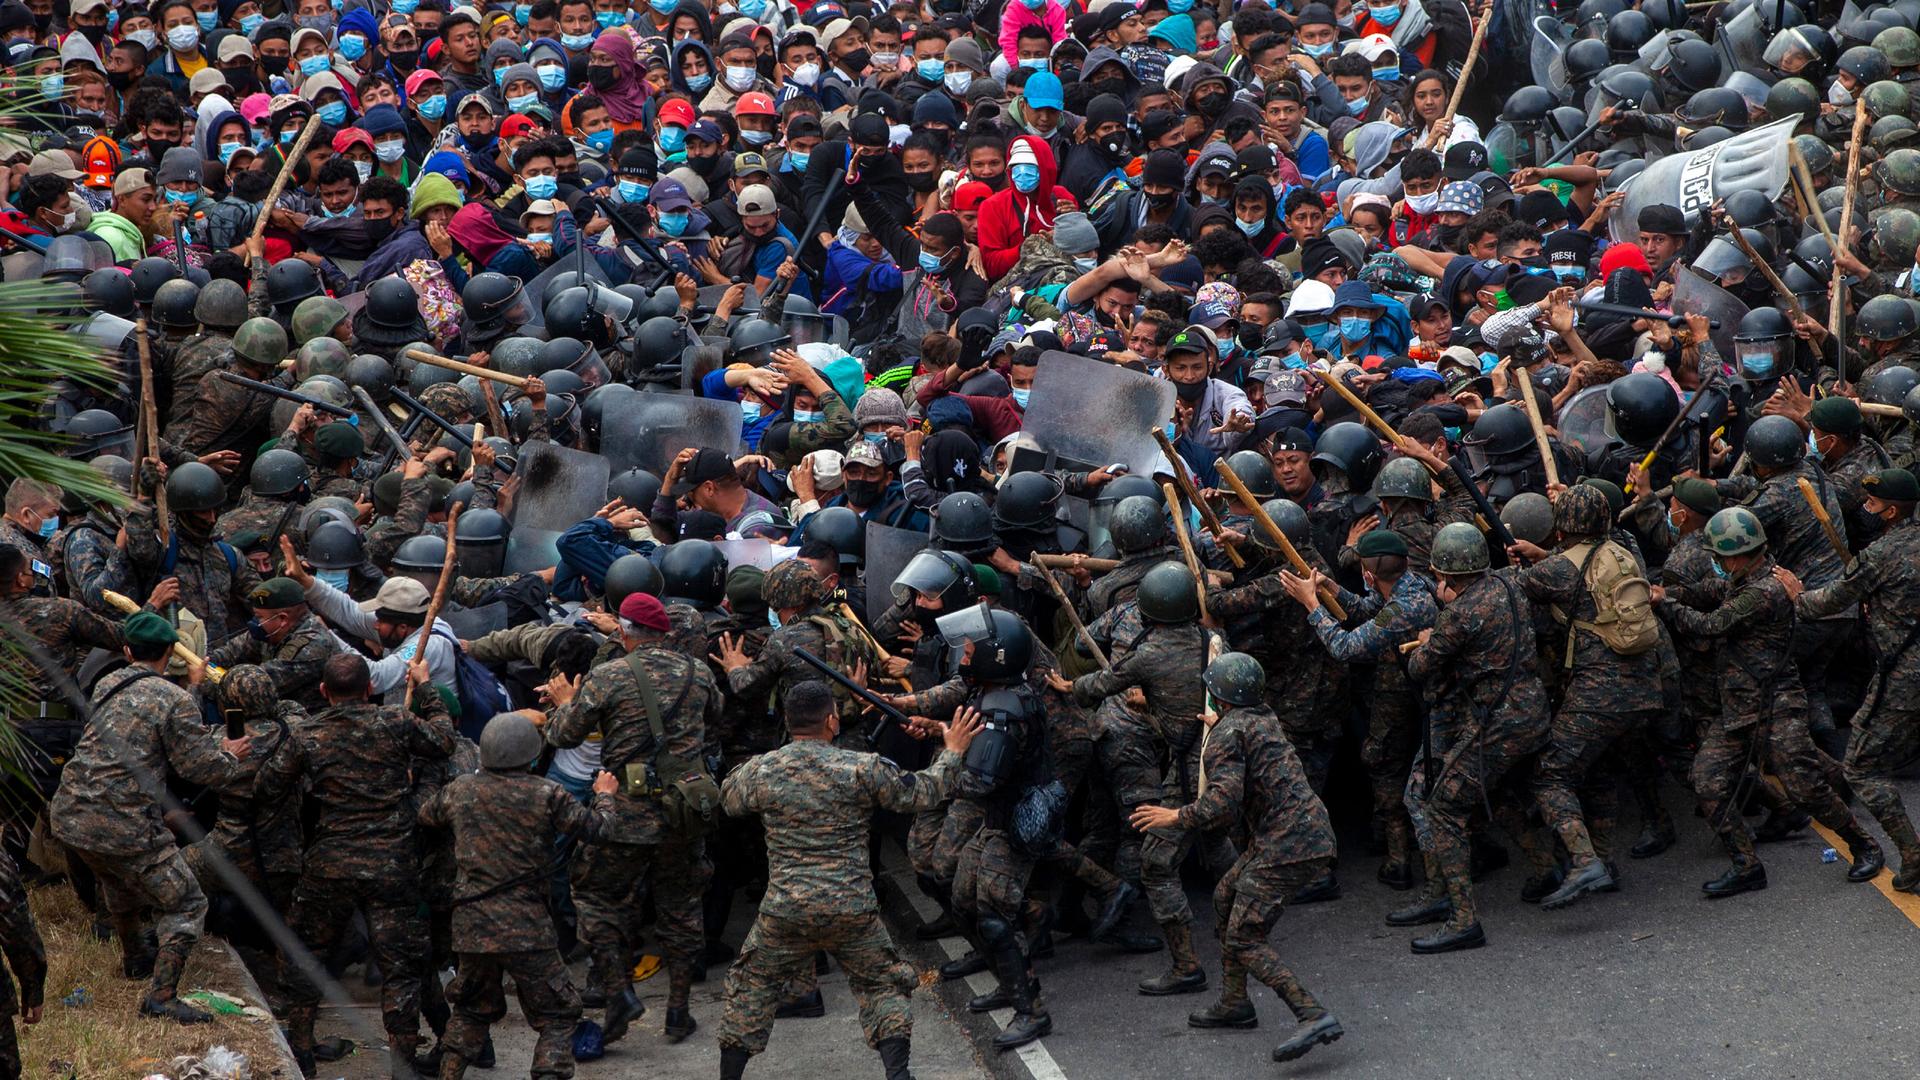 A large crowd of people are shown in conflict with security officials wearing military fatigues and helmets in a road.